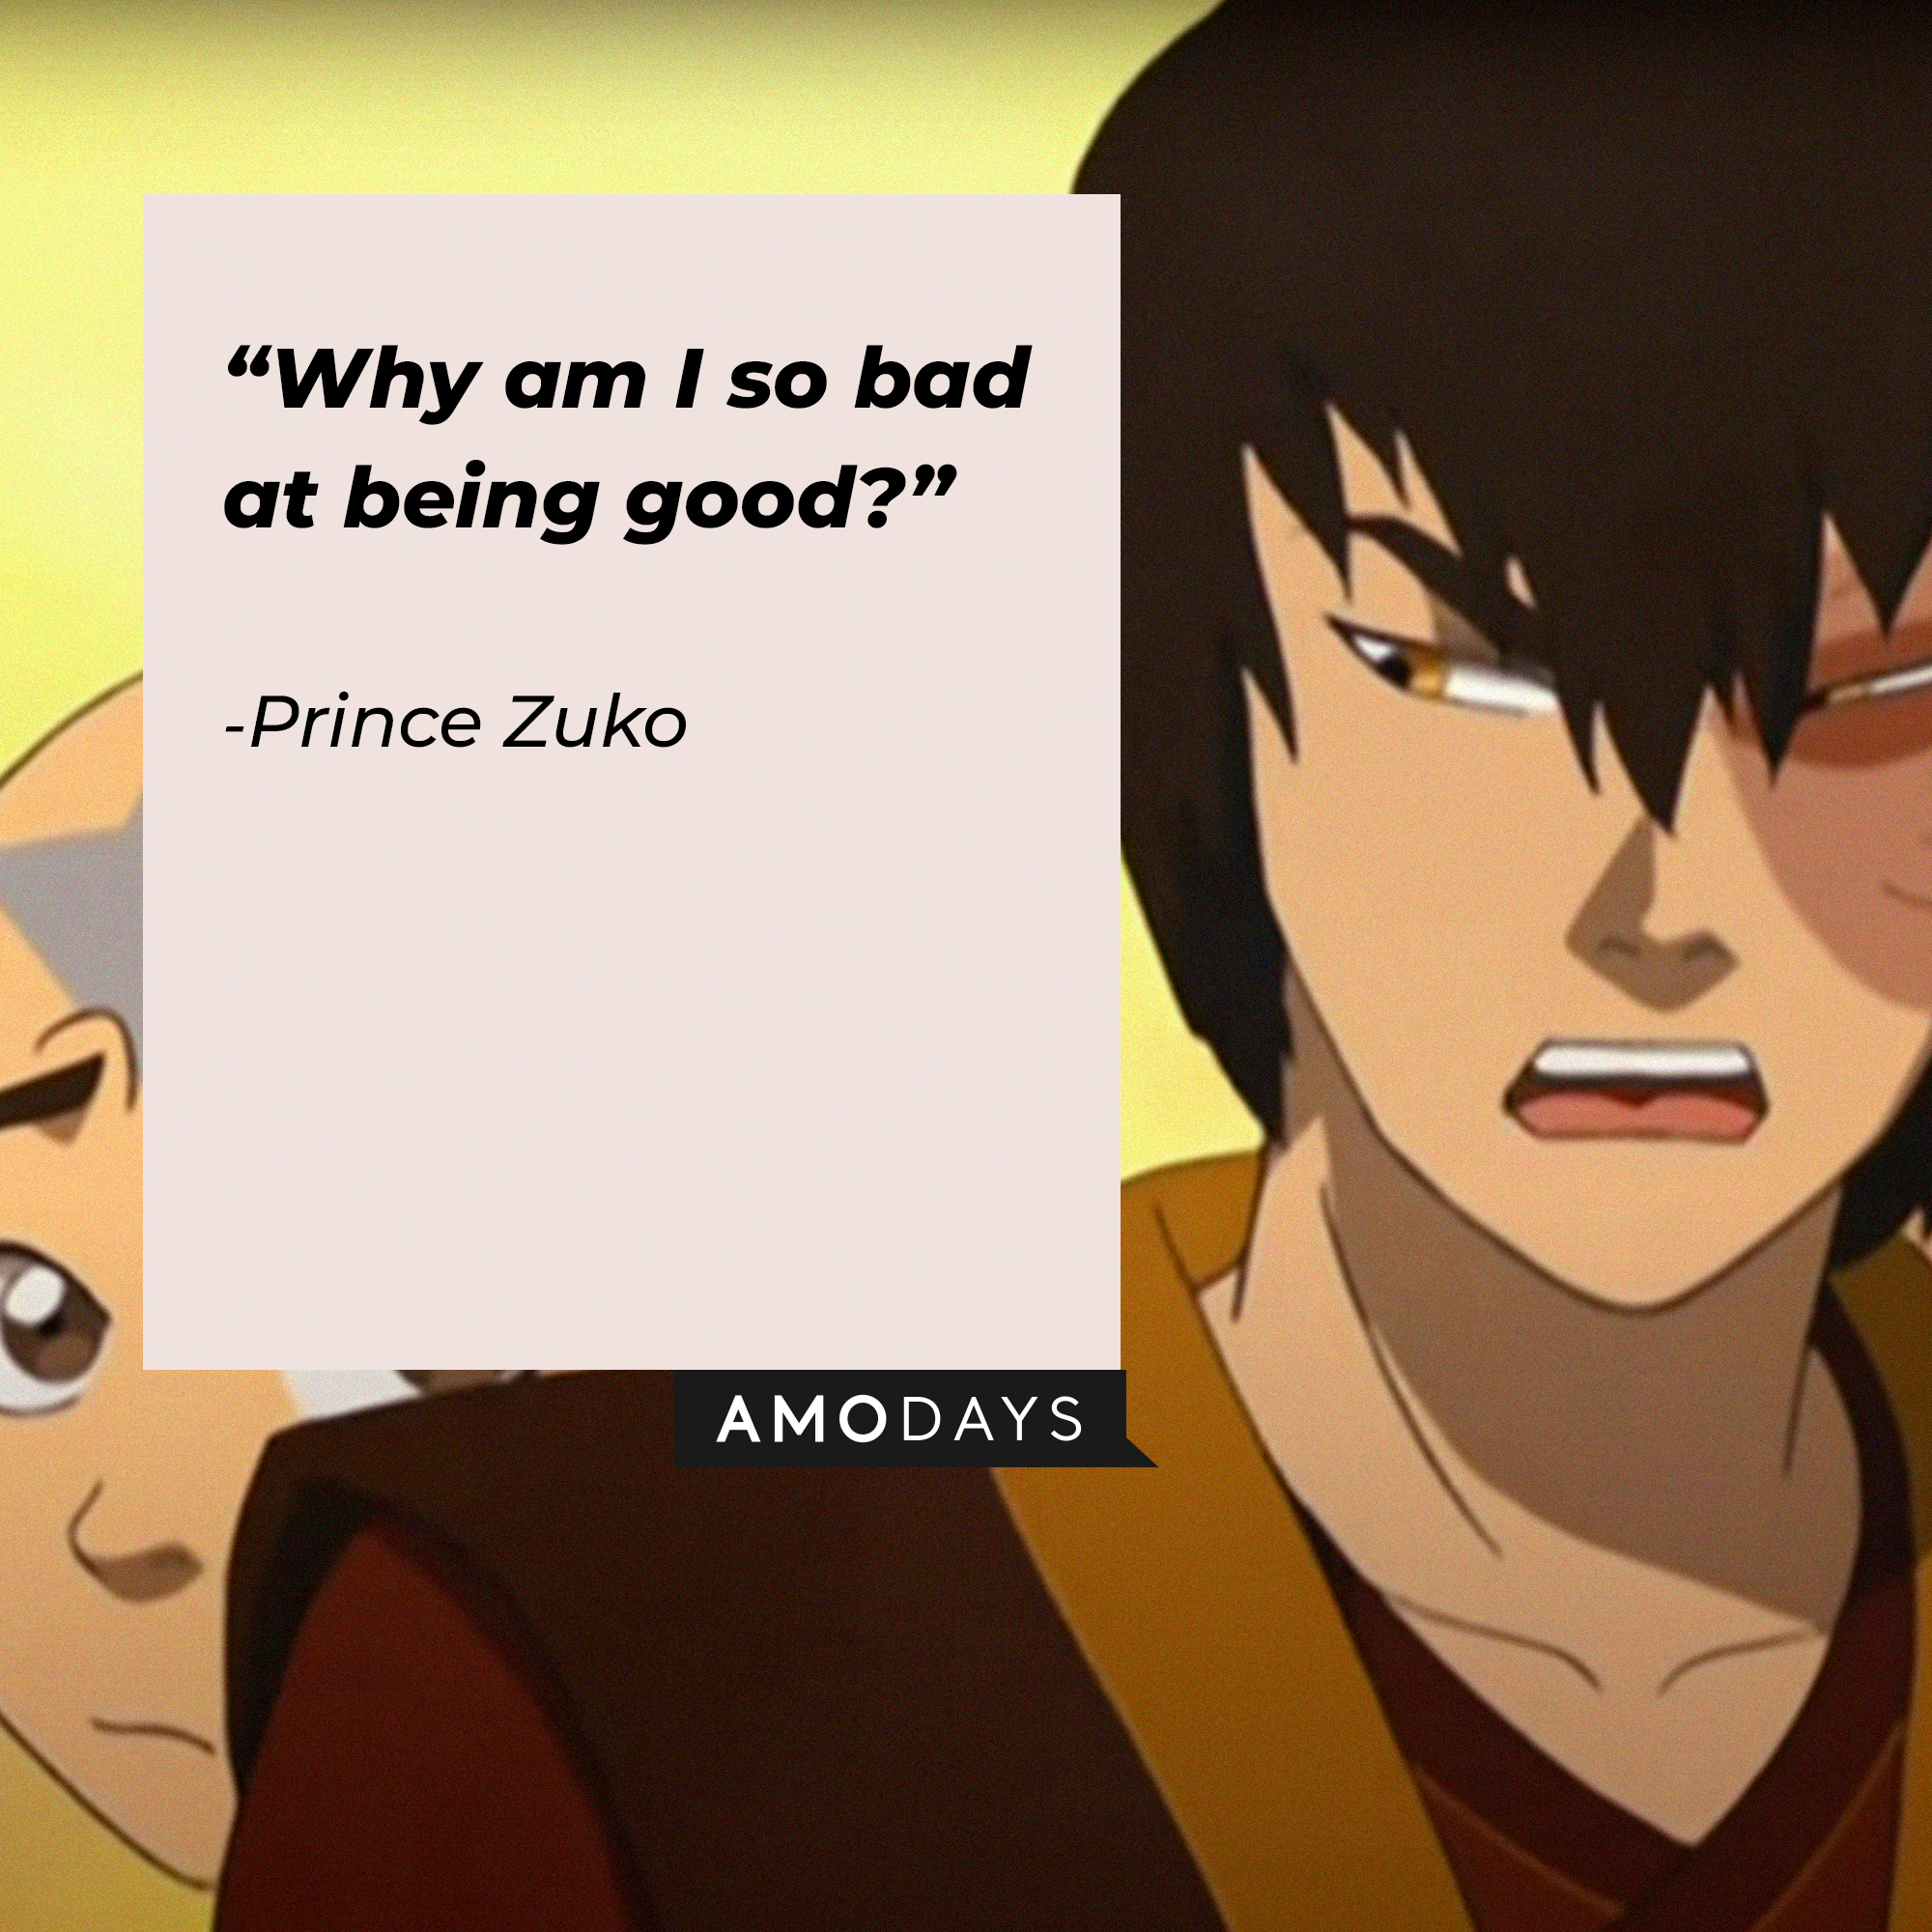 Zuko's quote: "Why am I so bad at being good?” | Source: youtube.com/TeamAvatar